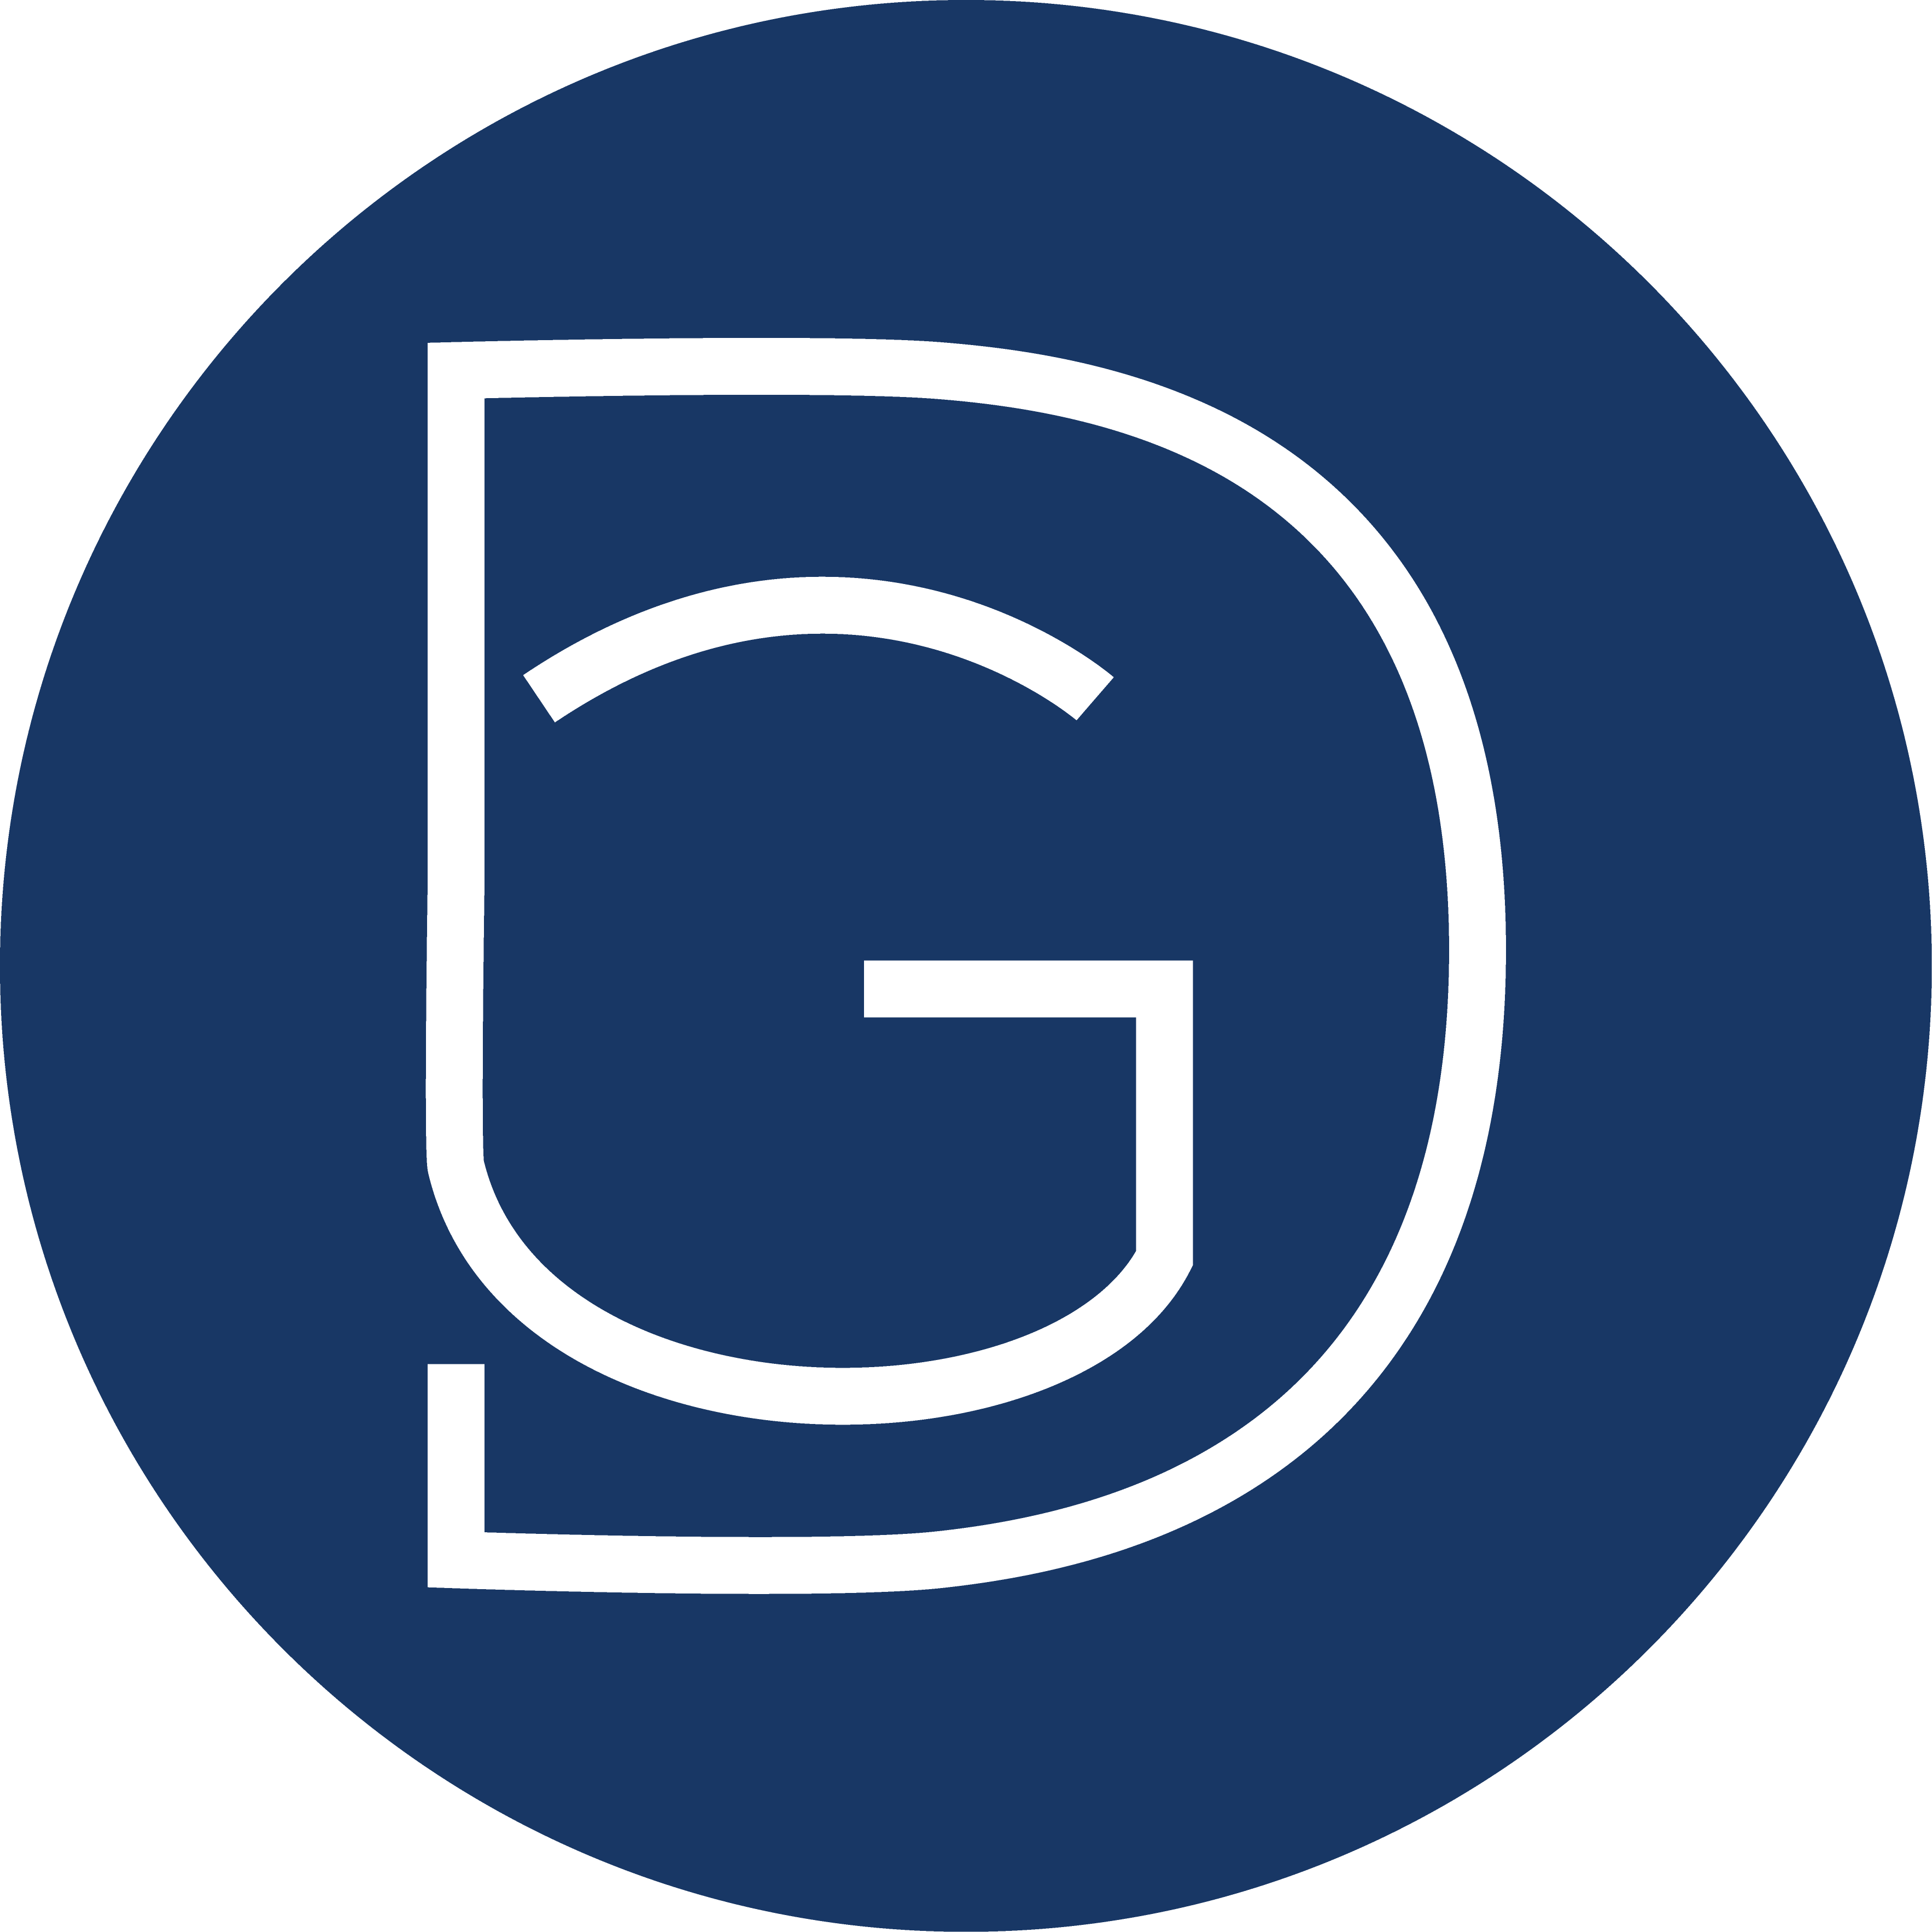 Stylized logo of the letter G within the letter D, representing the initials of Daniel "D.J." Geiger.